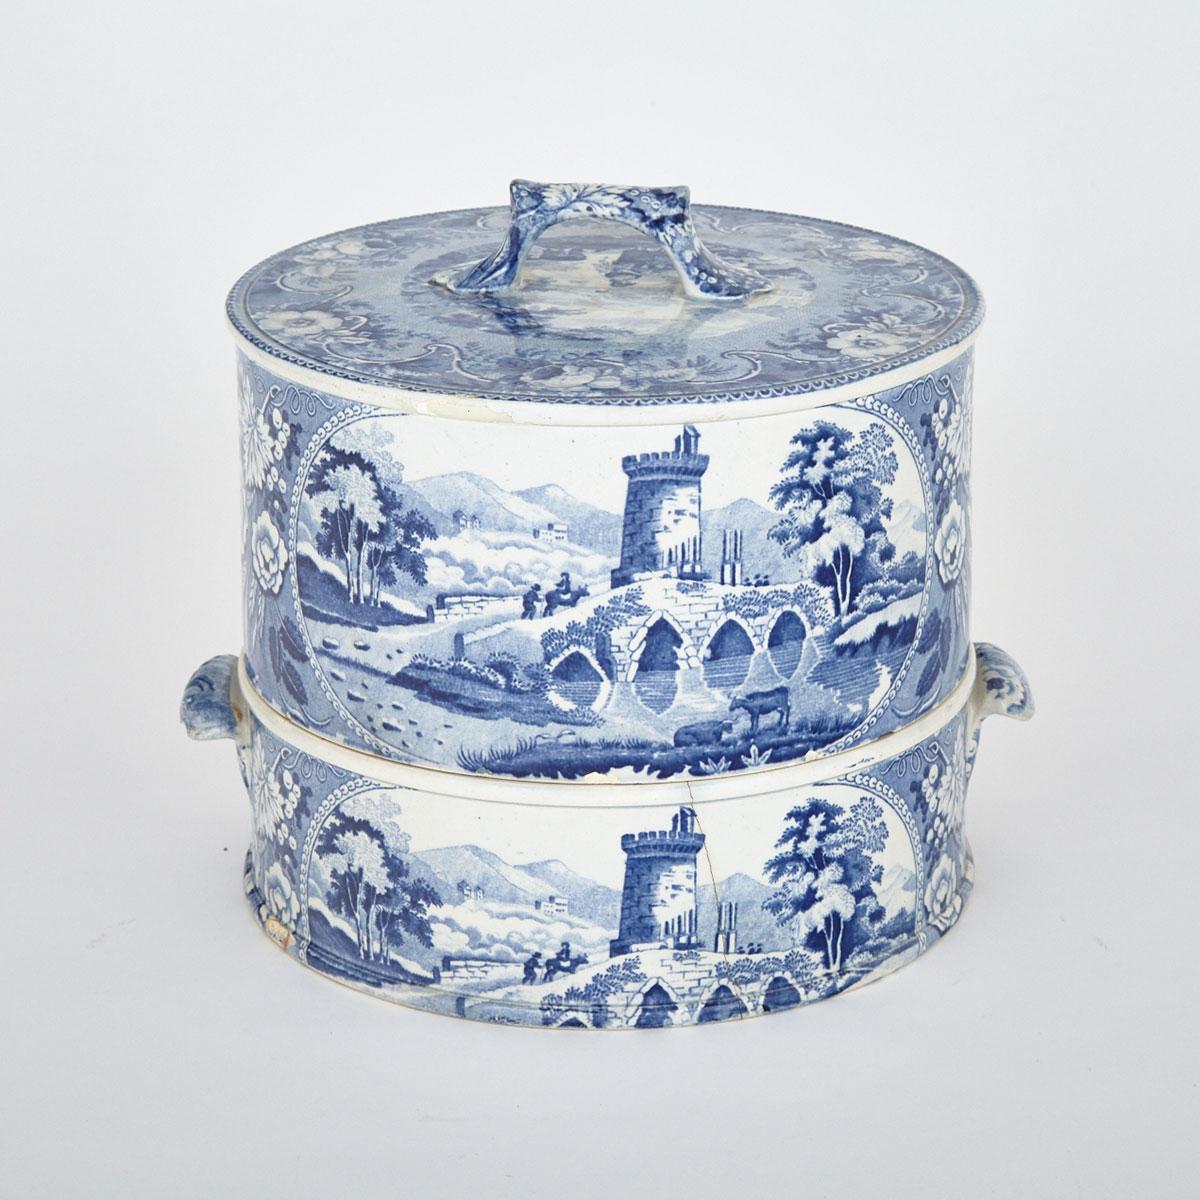 William Reid & Son Blue Printed Pearlware Covered Cheese Dish, c.1837-38